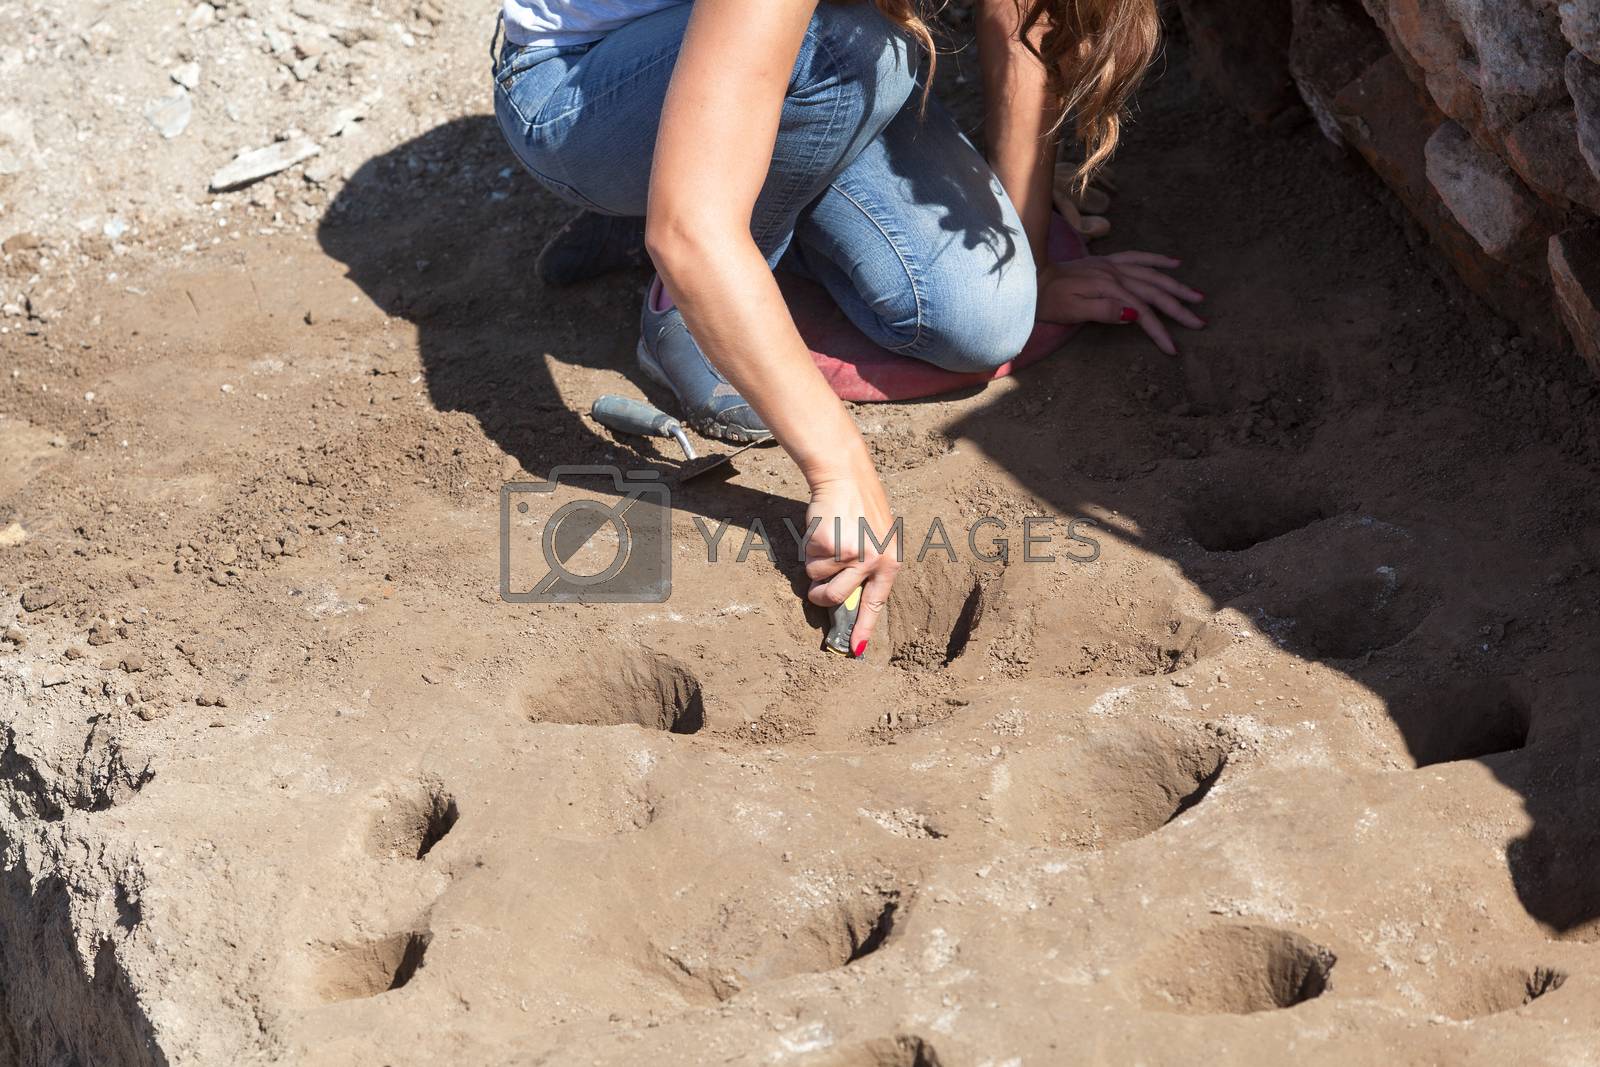 Royalty free image of Archaeology. Archaeologist working at archaeological site. by wellphoto